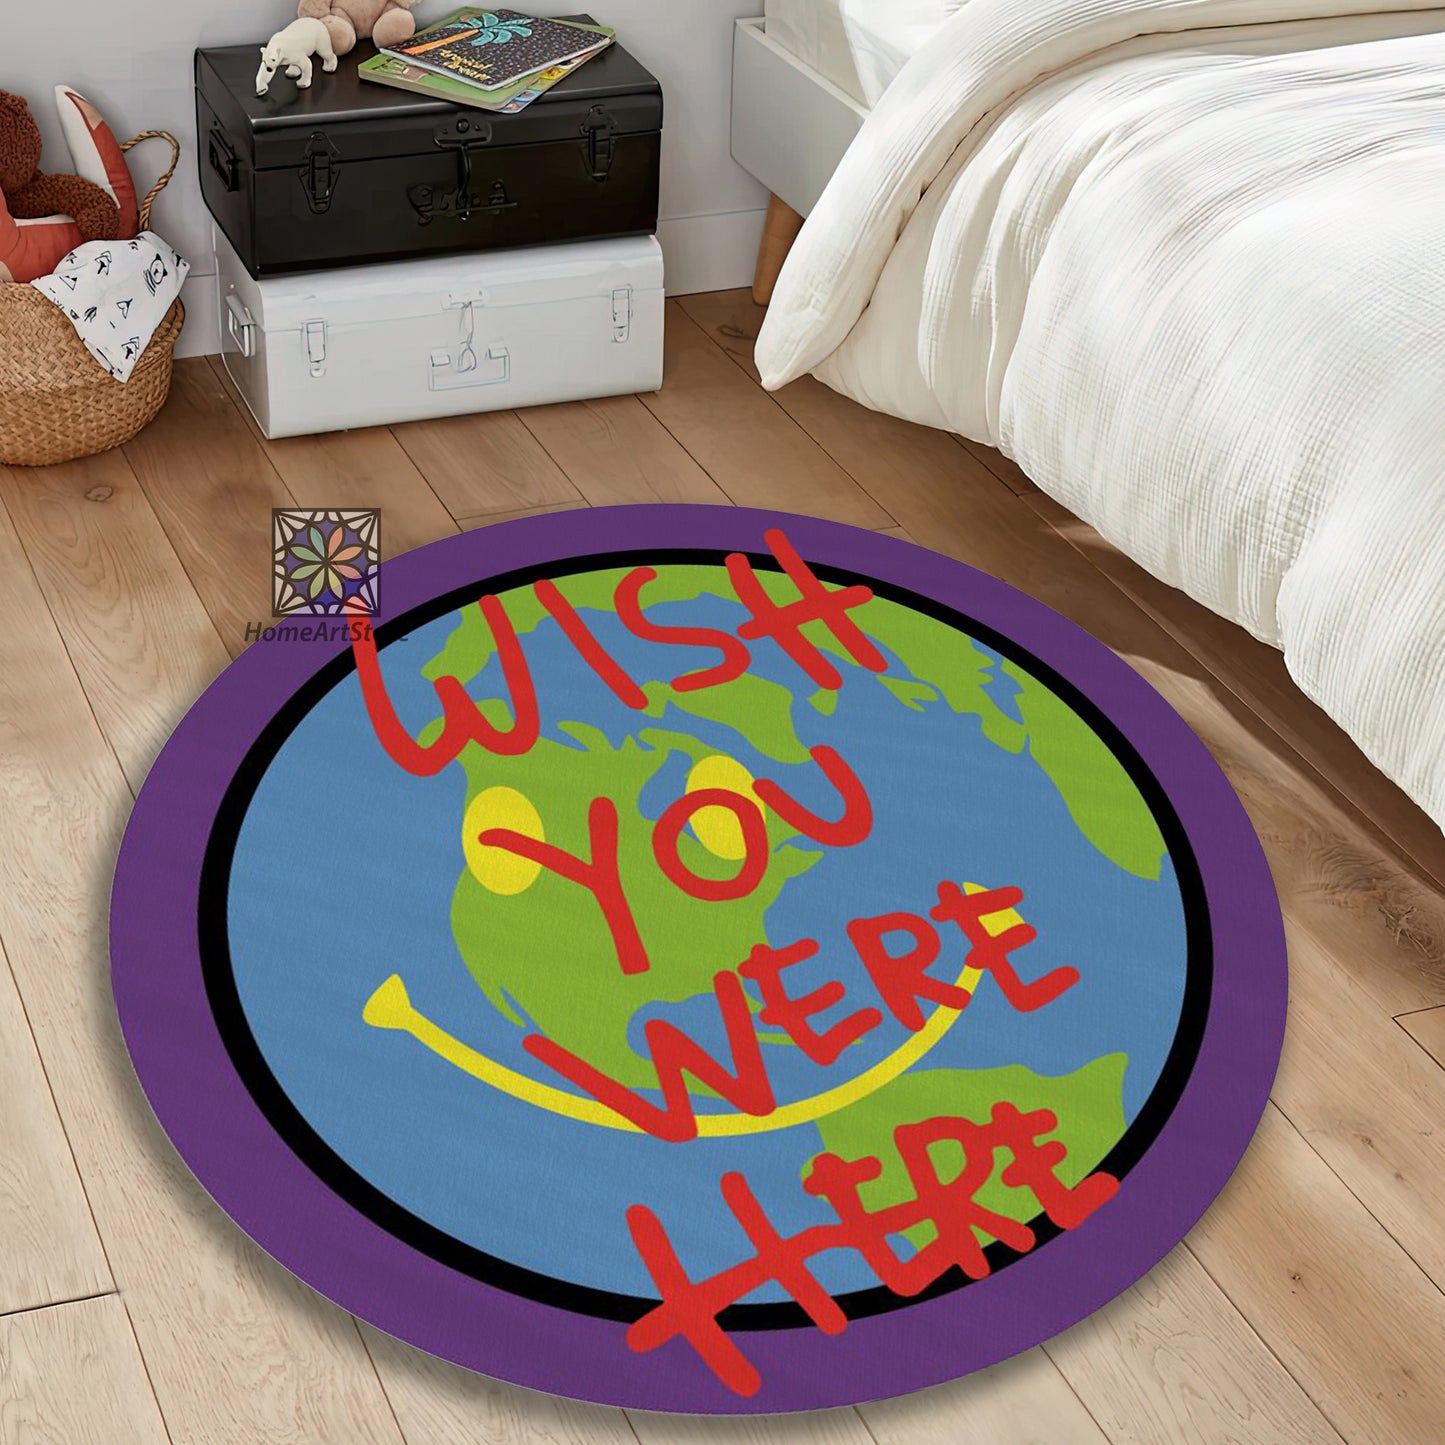 Wish You Were Here Texted Rug, Romantic Carpet, Love Decor, World Printed Mat, Valentine’s Day Gift